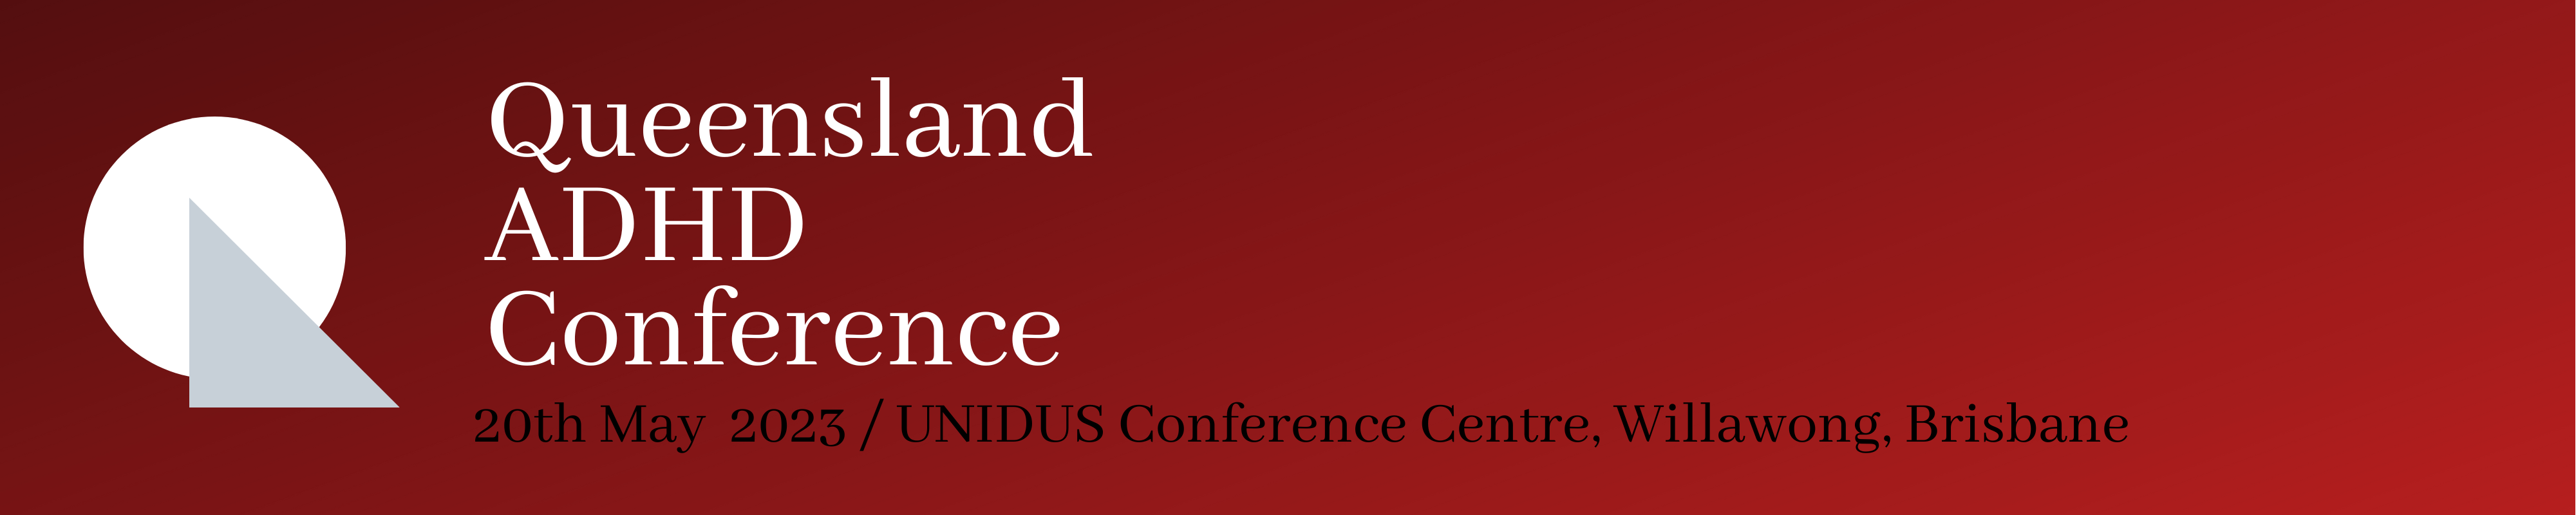 Queensland ADHD Conference 2023 Tickets, UNIDUS Conference Centre